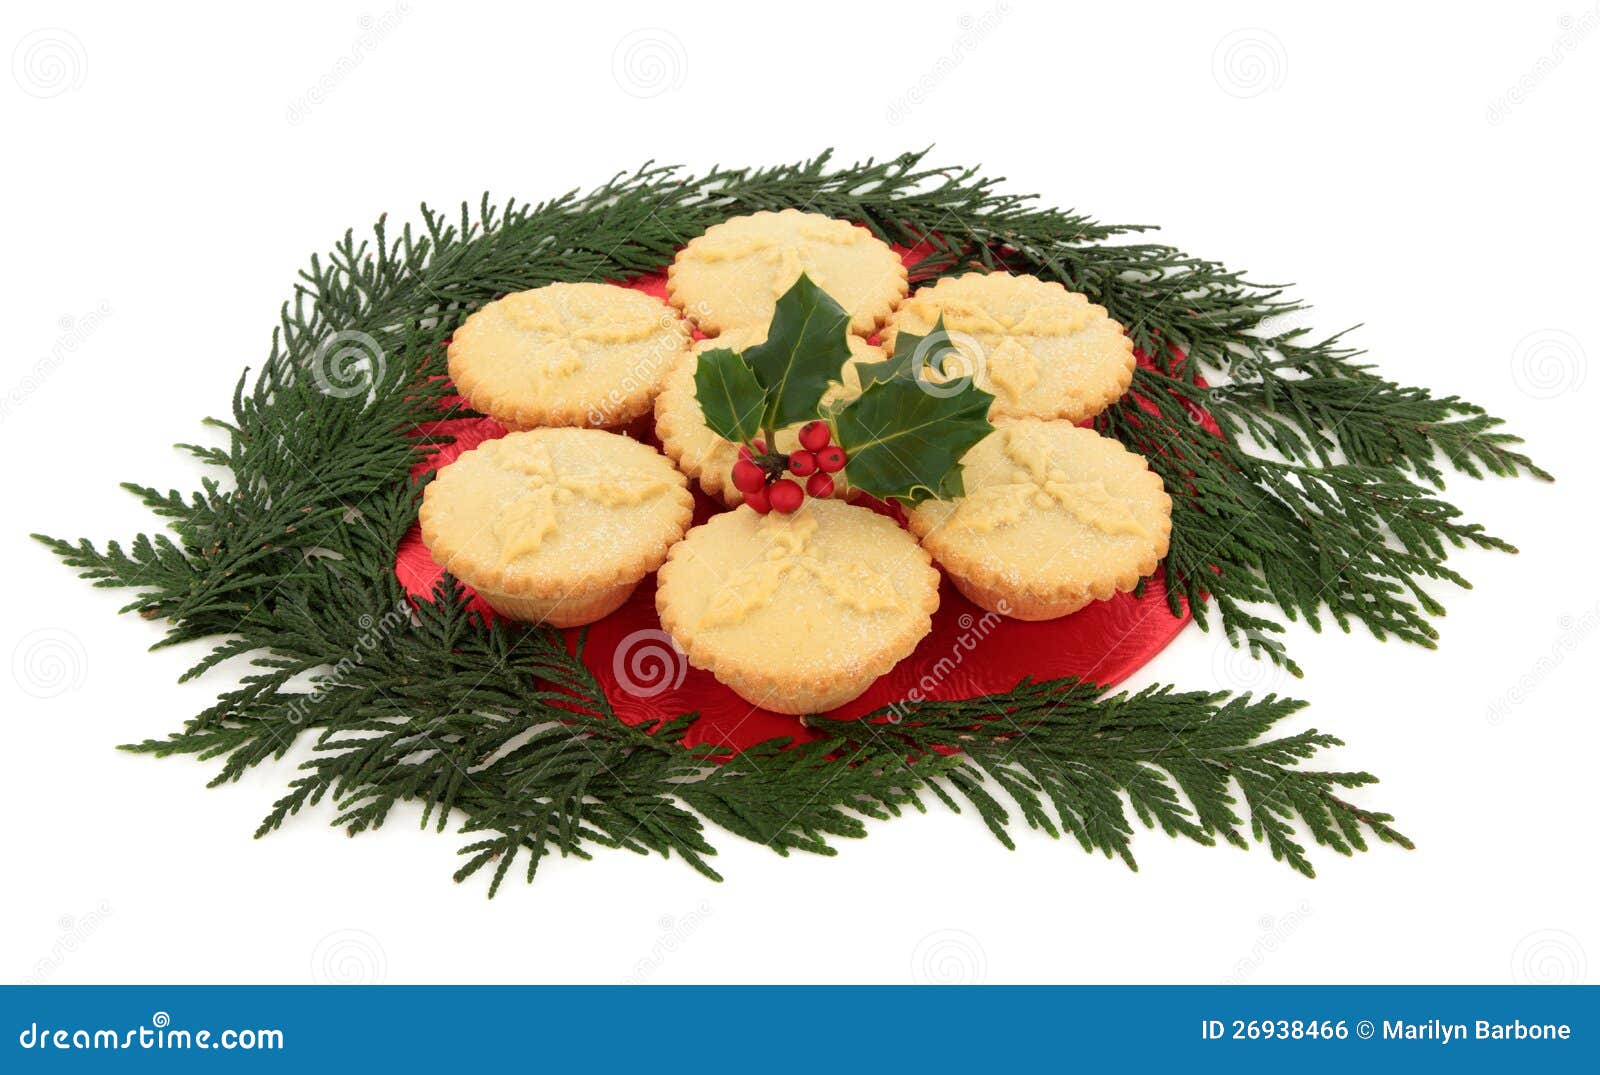 clipart christmas mince pies - photo #40